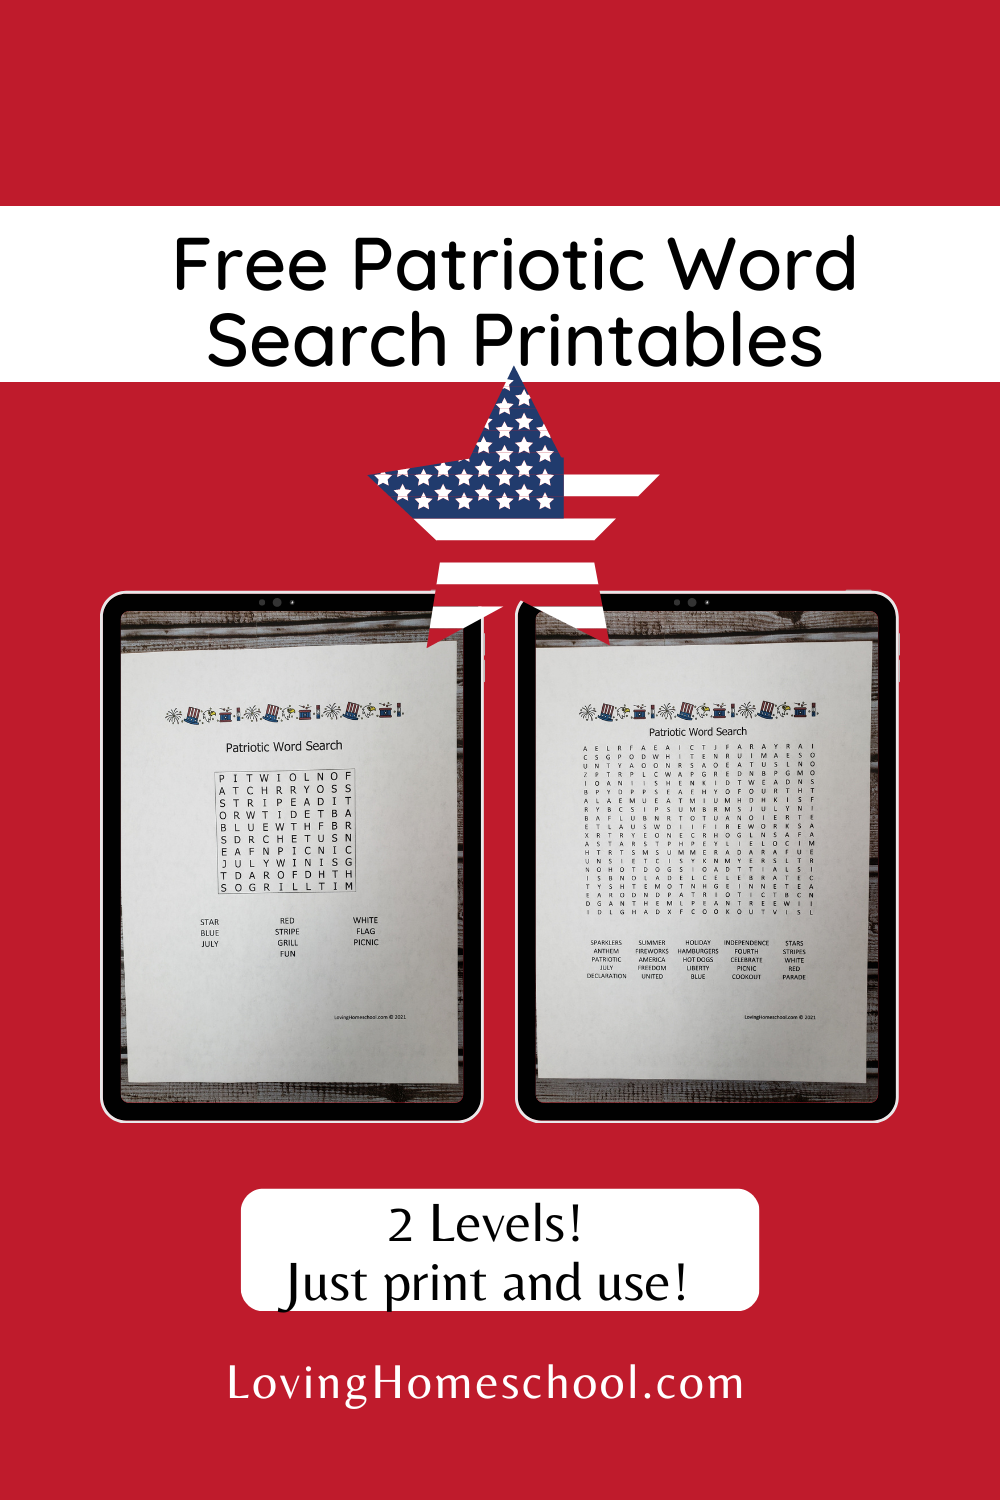 Patriotic Word Search Pinterest Pin